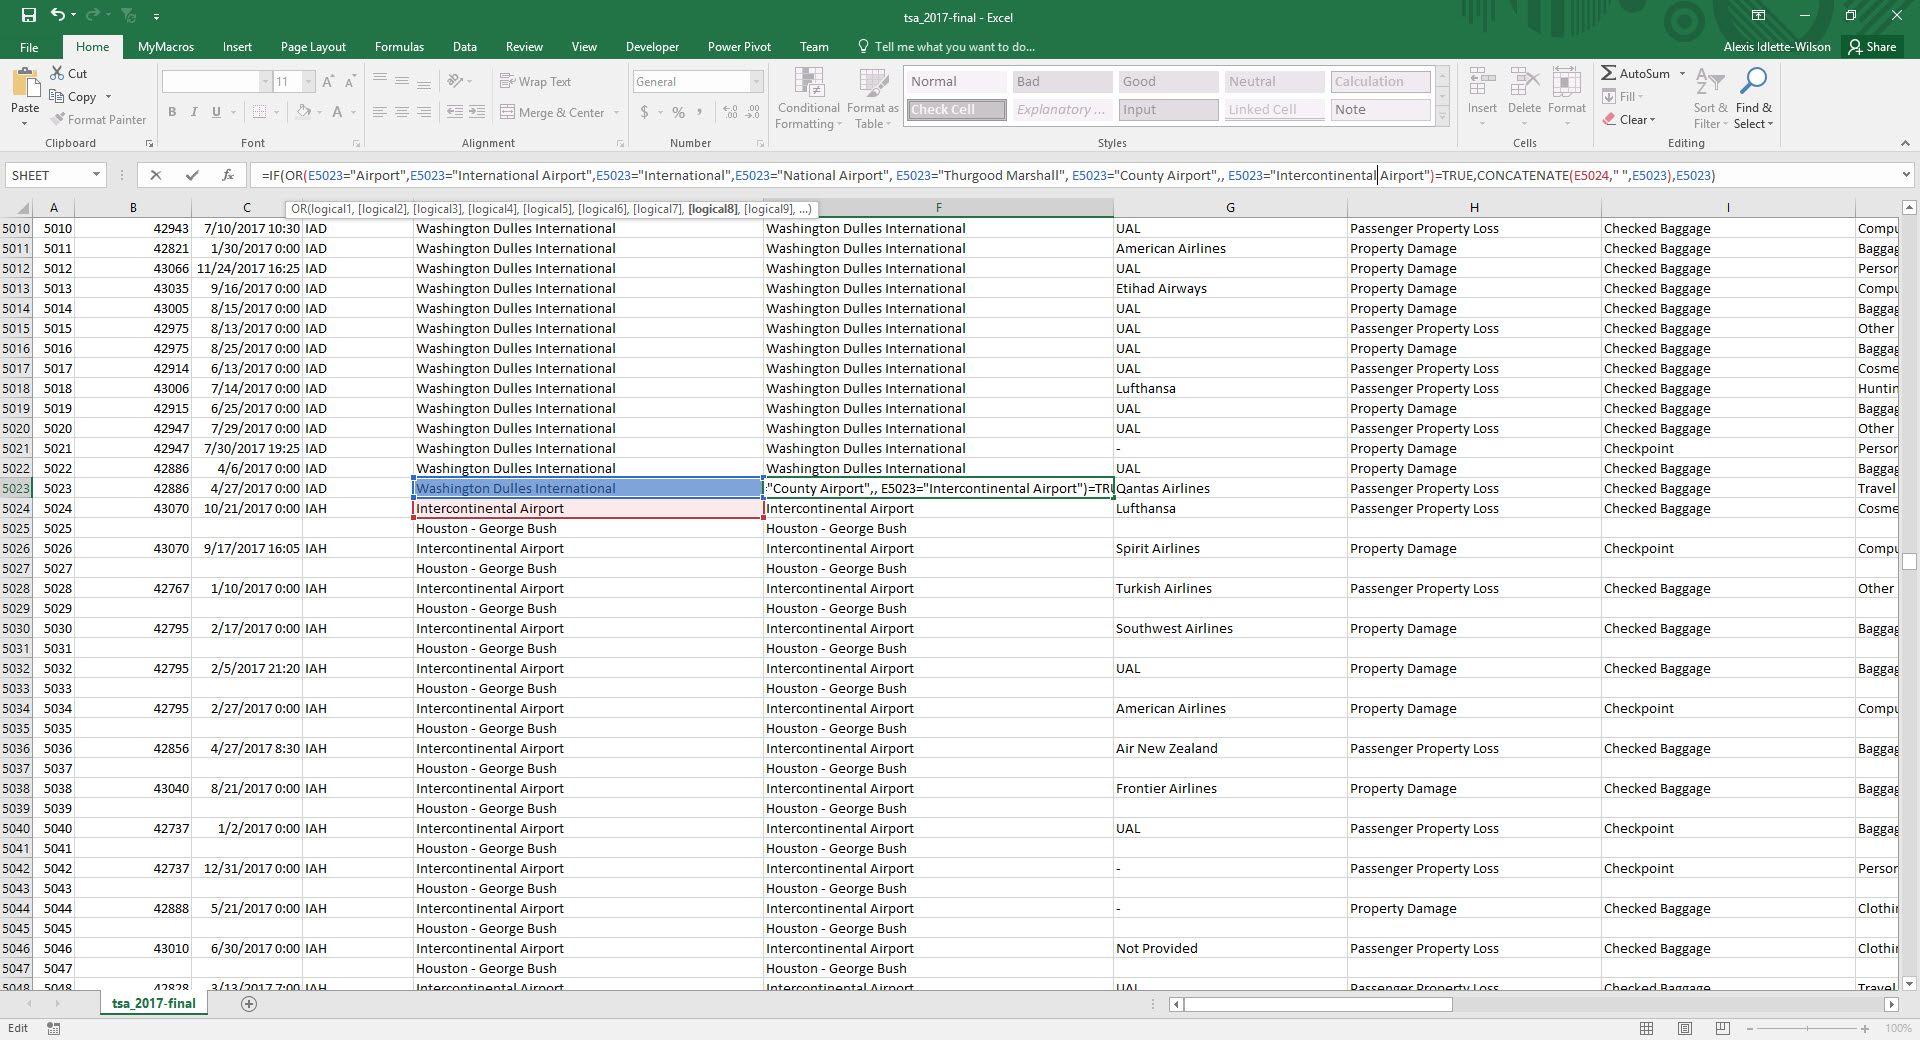 An image of an Excel spreadsheet